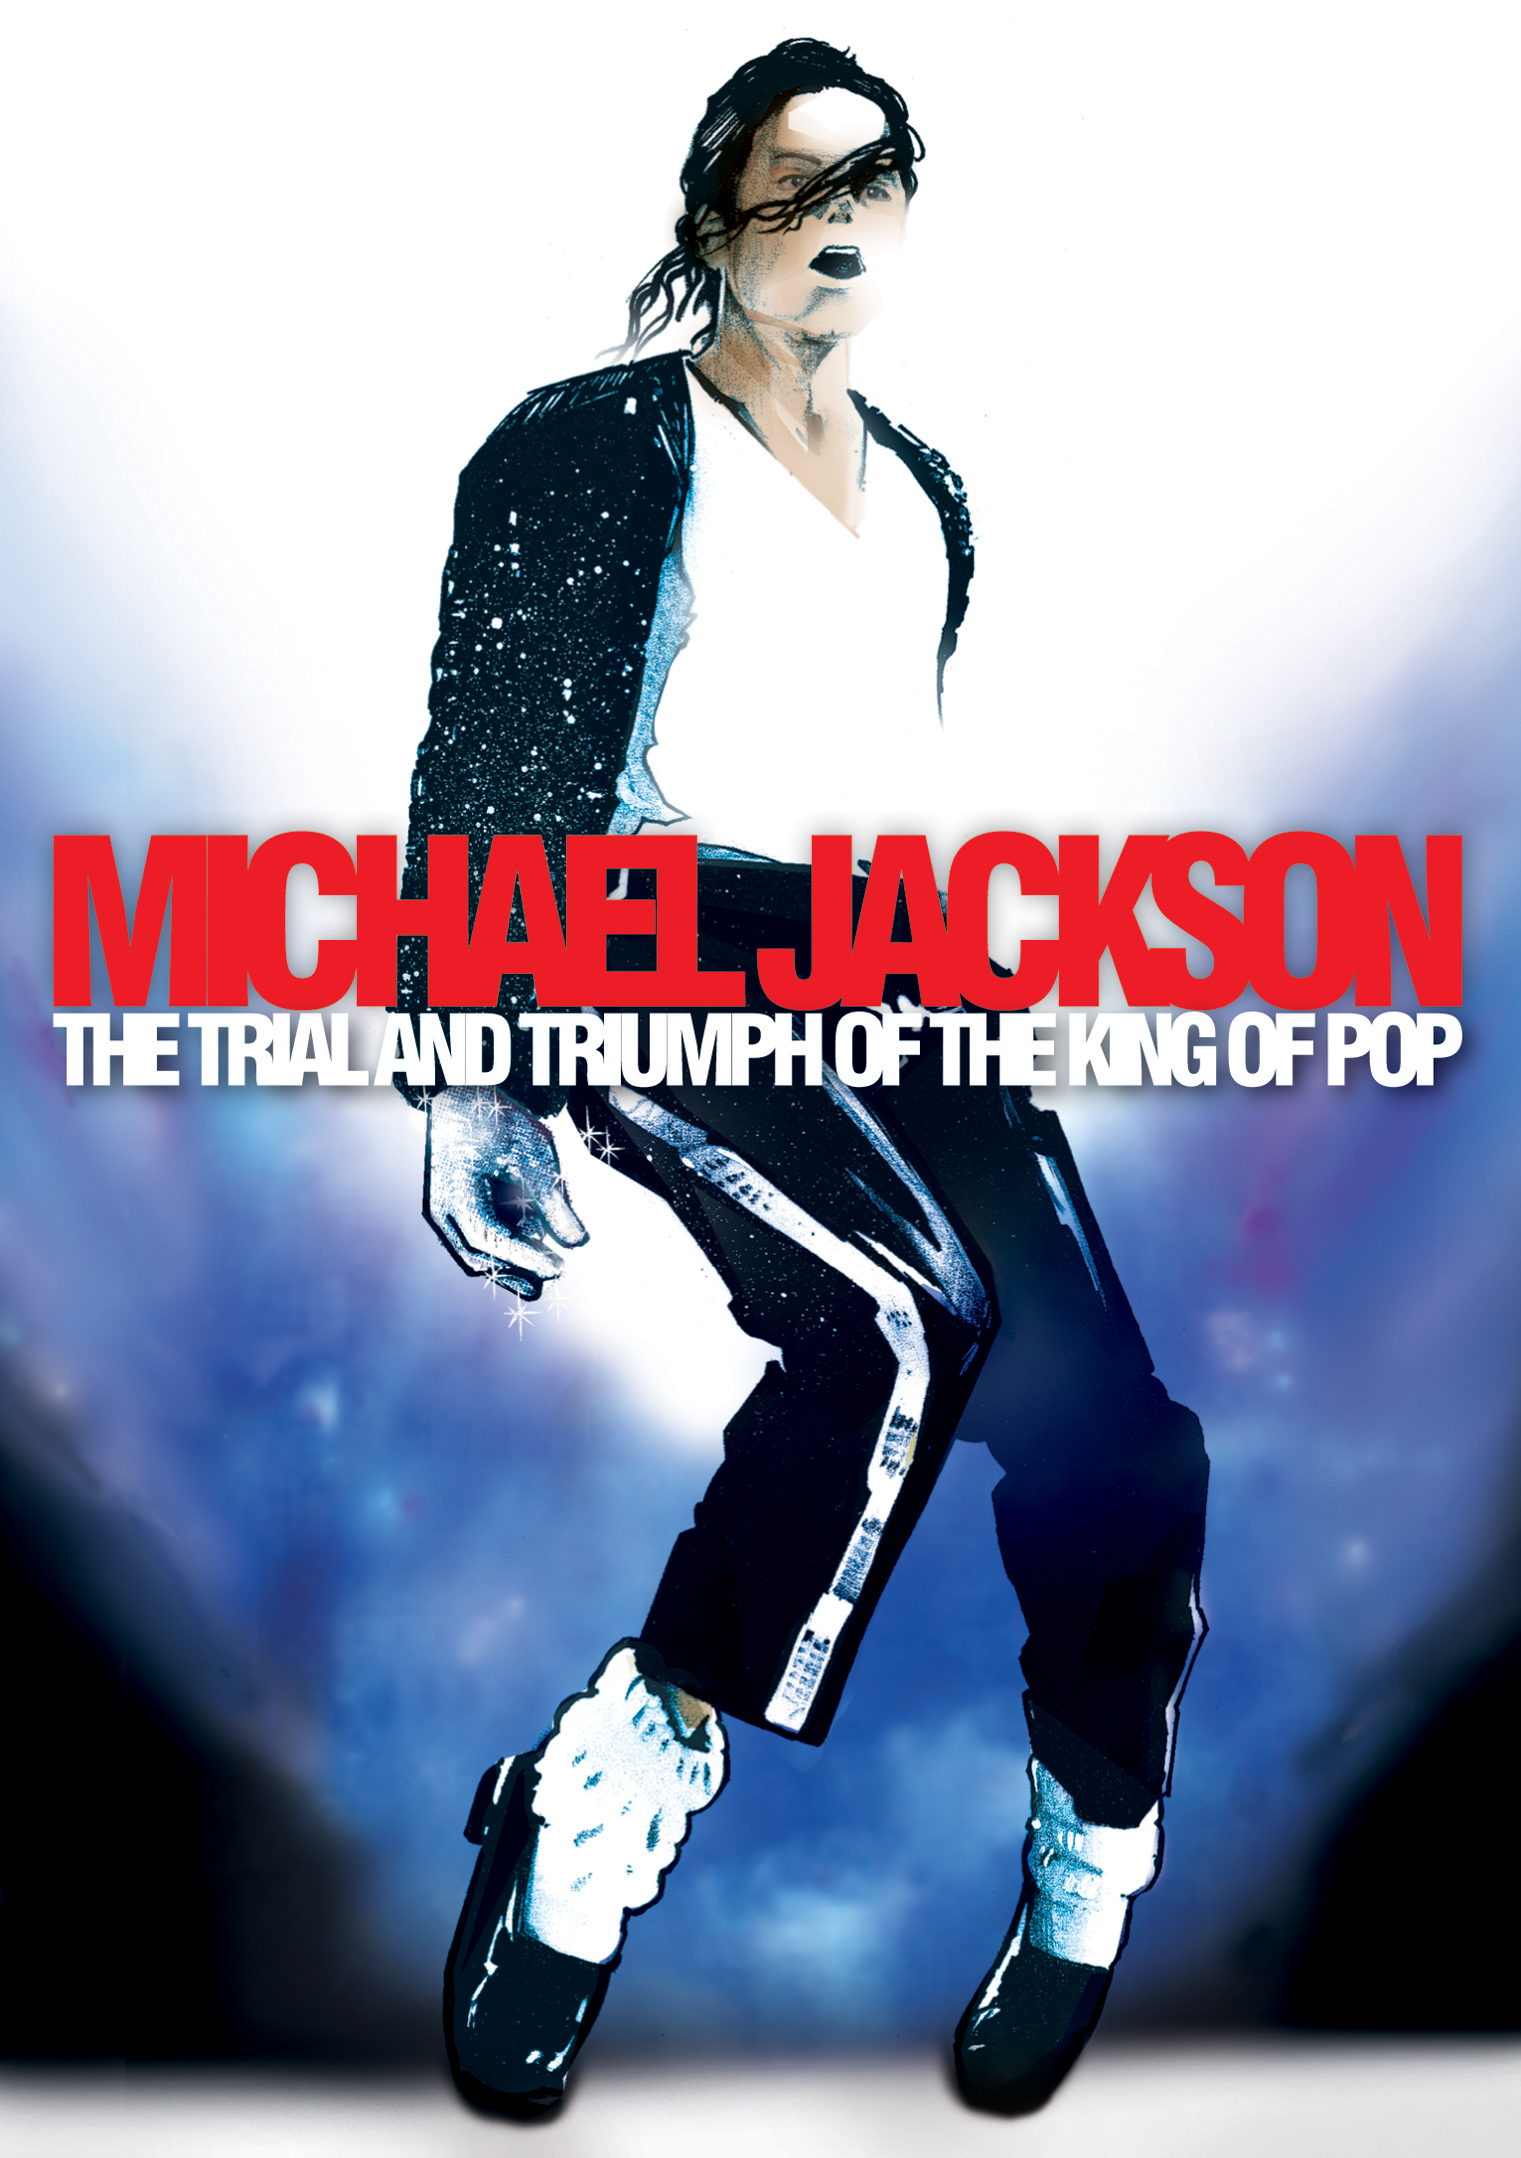  Michael Jackson: The Trial and Triumph of the King of Pop [DVD] [2009]